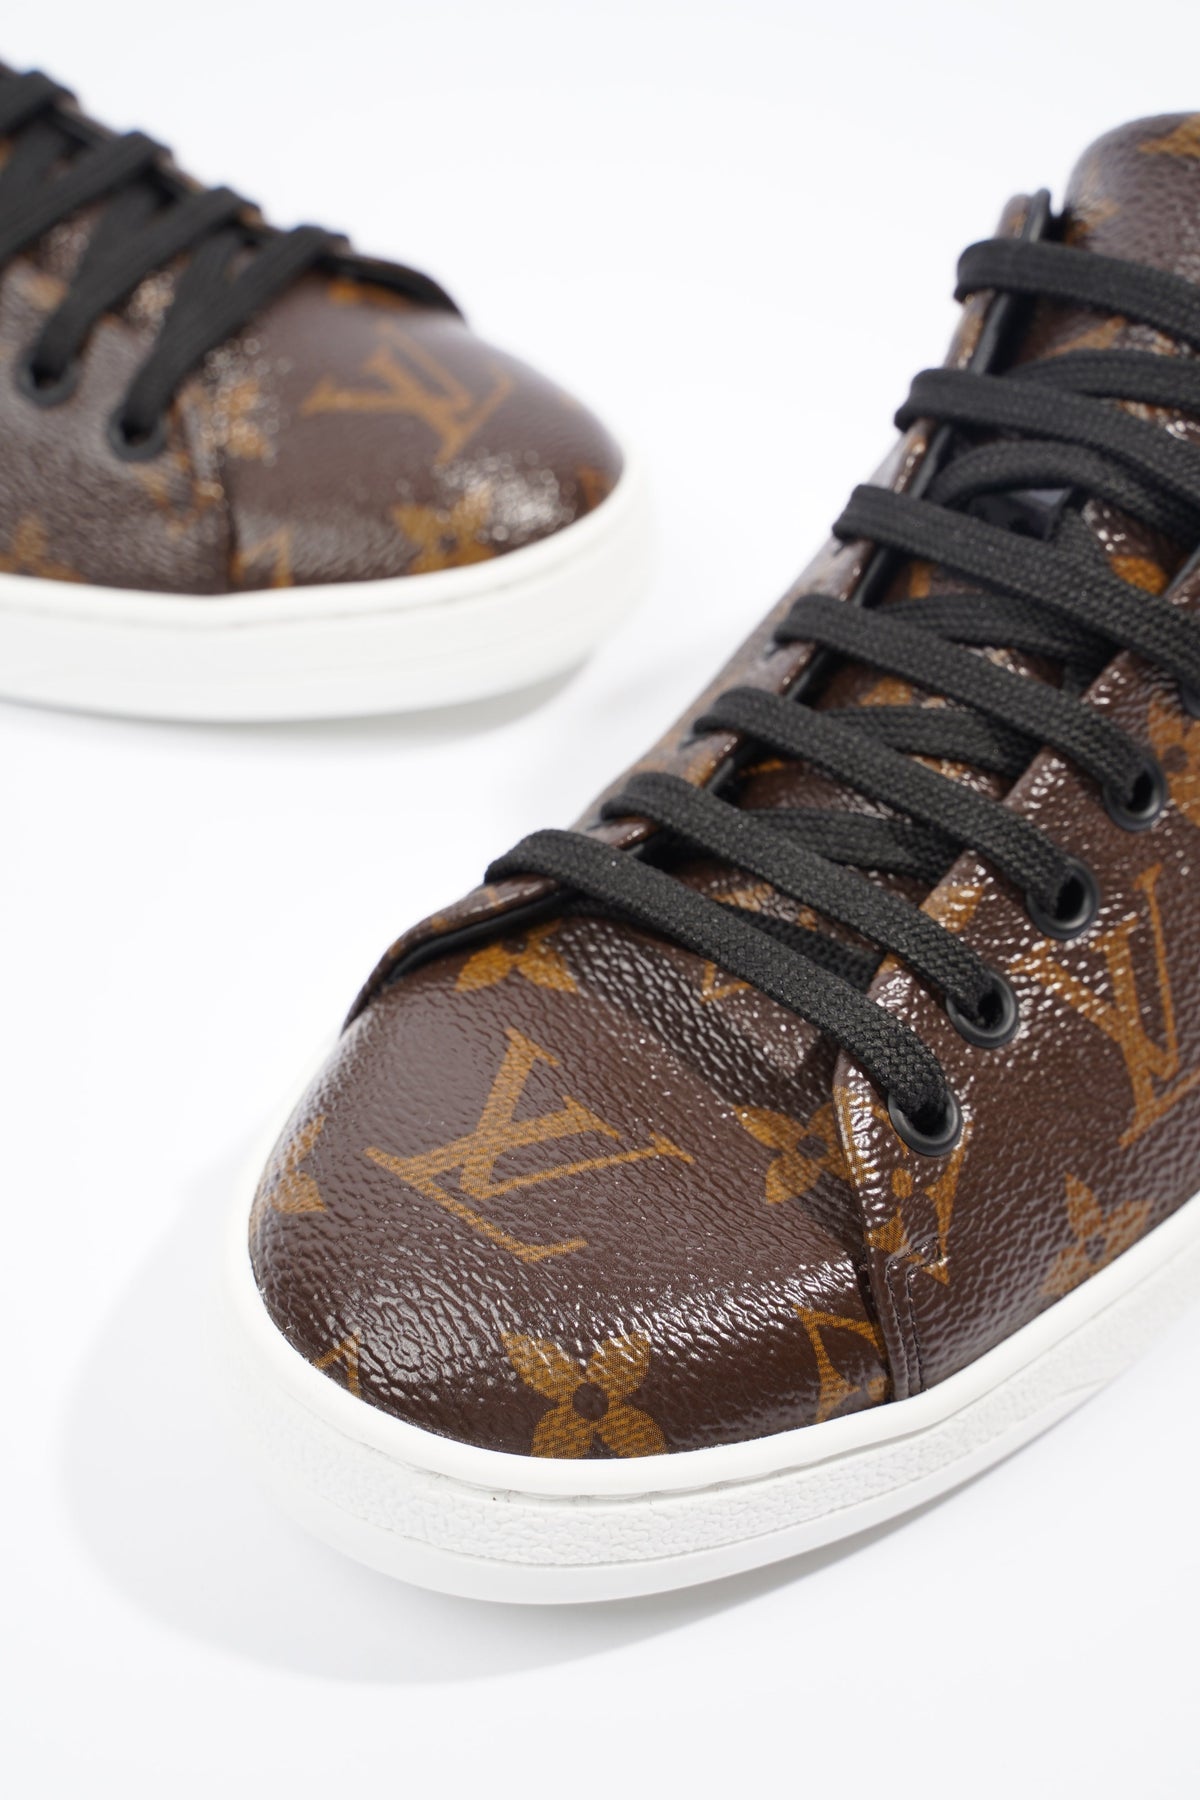 Louis Vuitton Frontrow Lace Up Sneakers in Brown Monogram Canvas